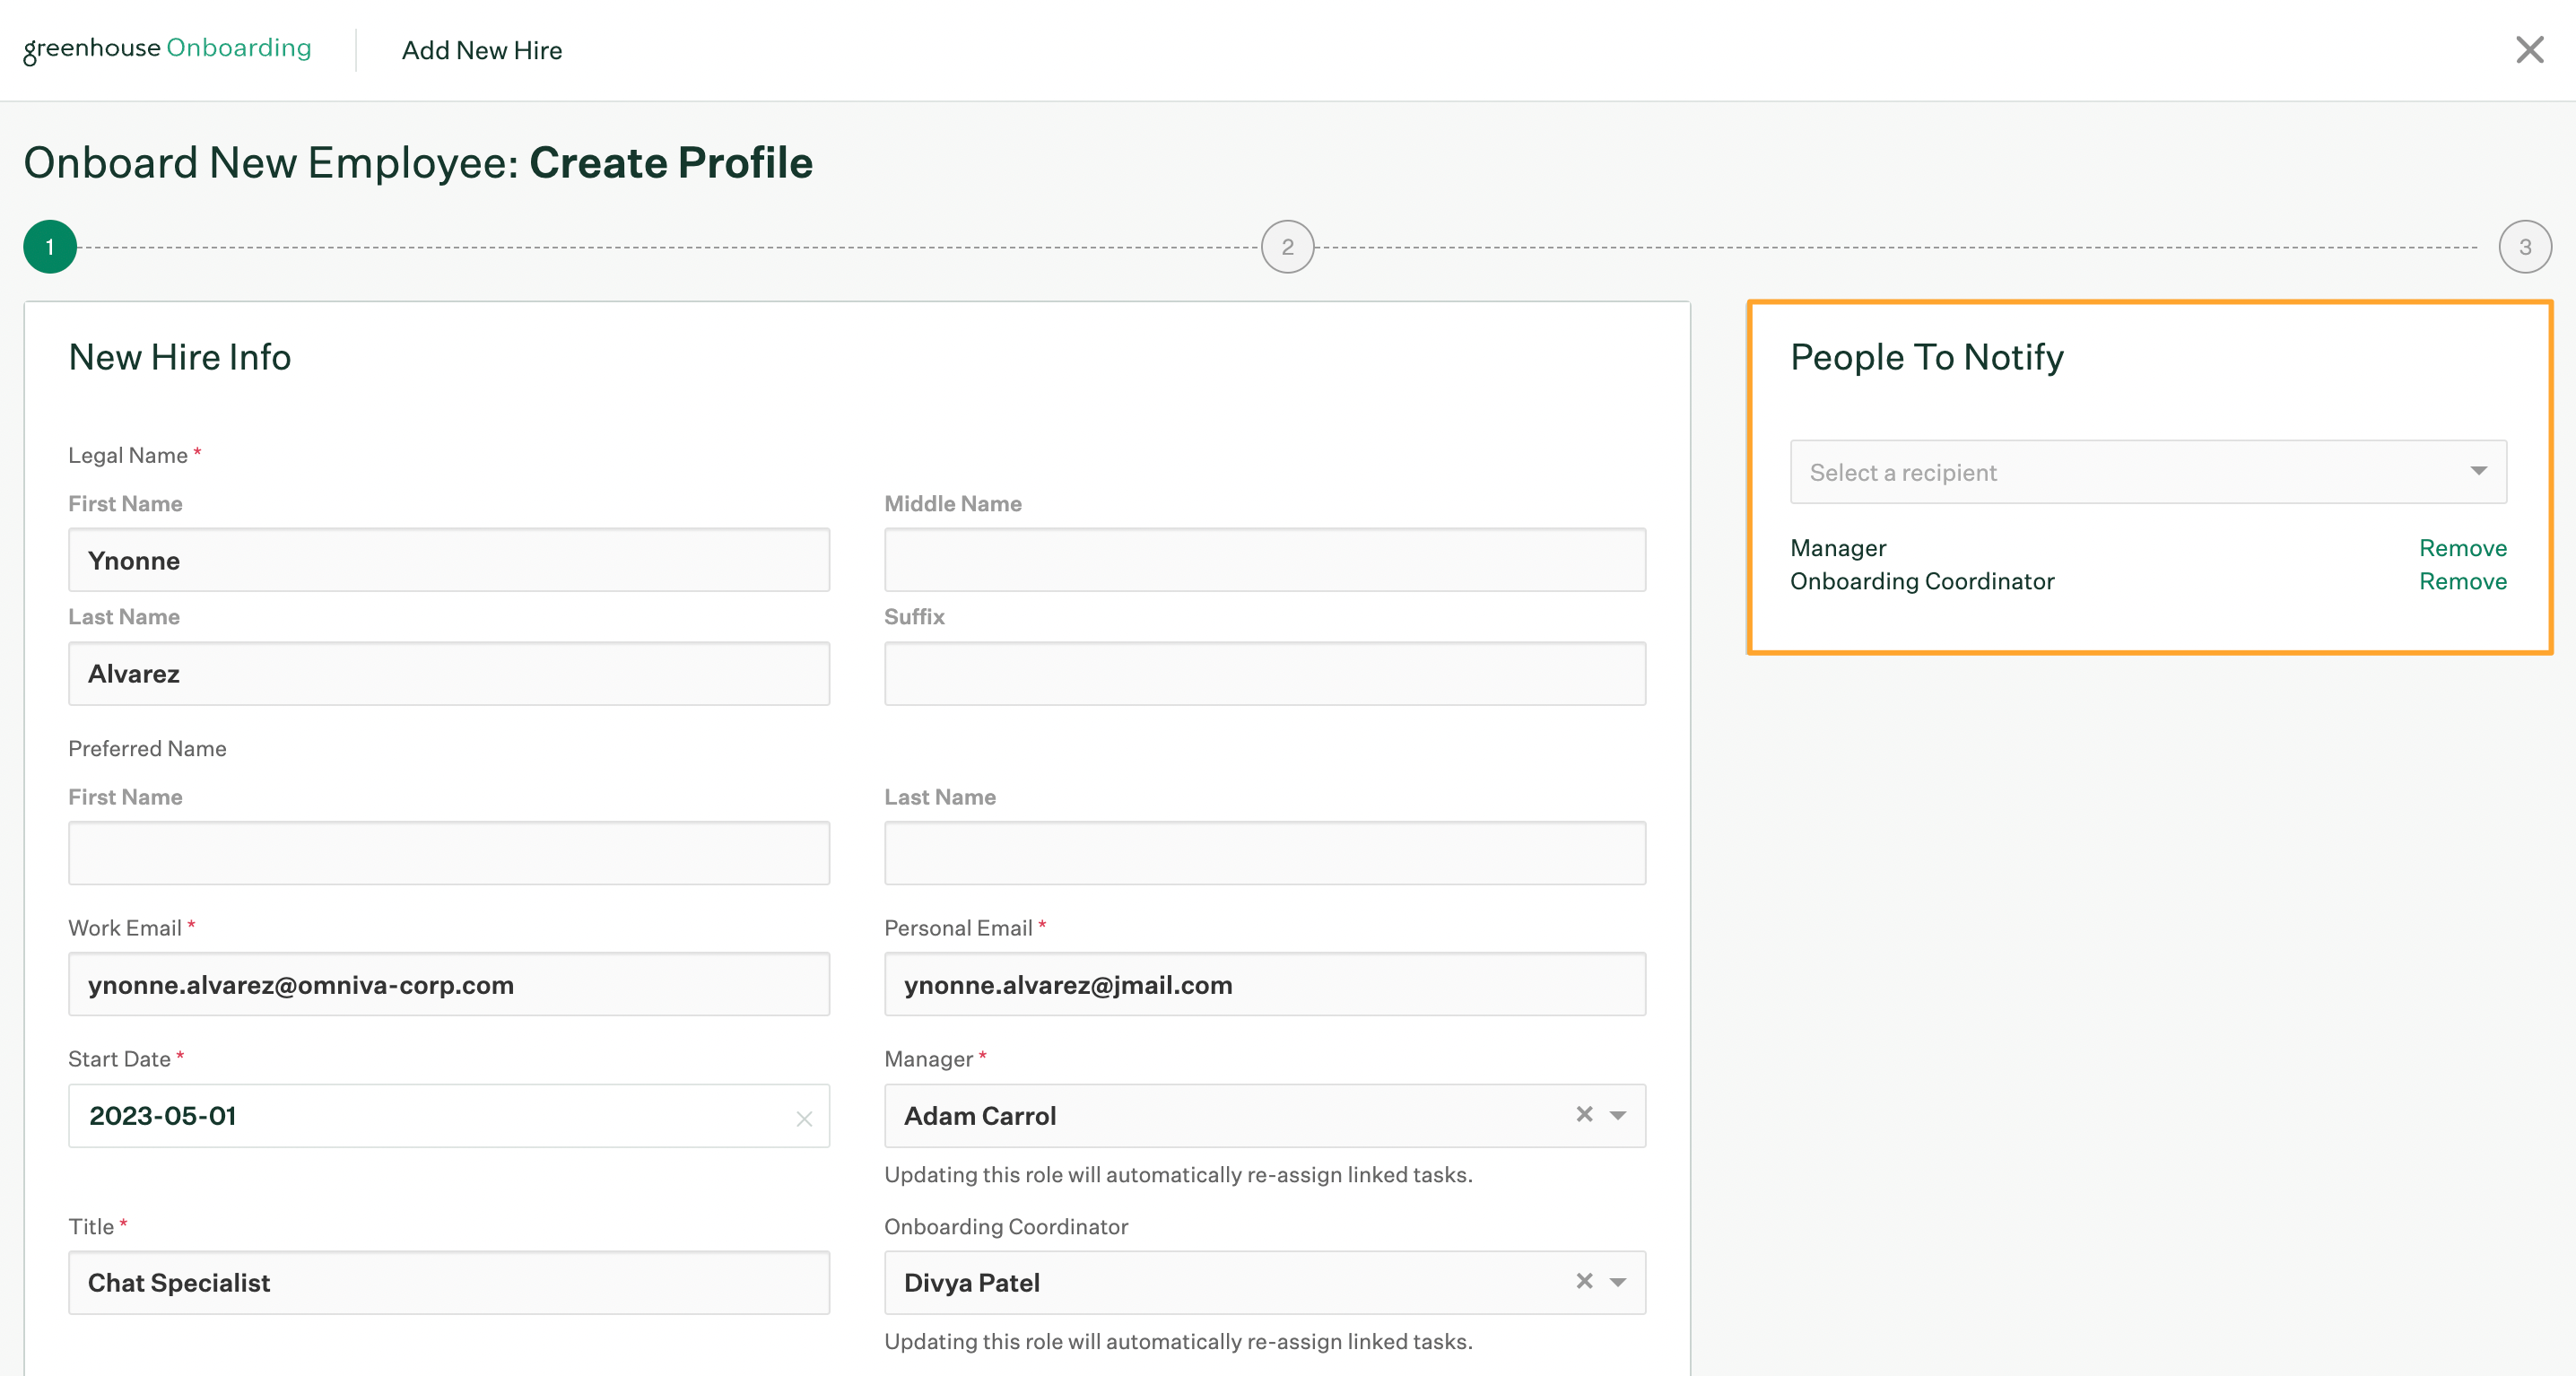 Onboard-new-employee-create-profile-page-with-people-to-notify-field-highlighted.png